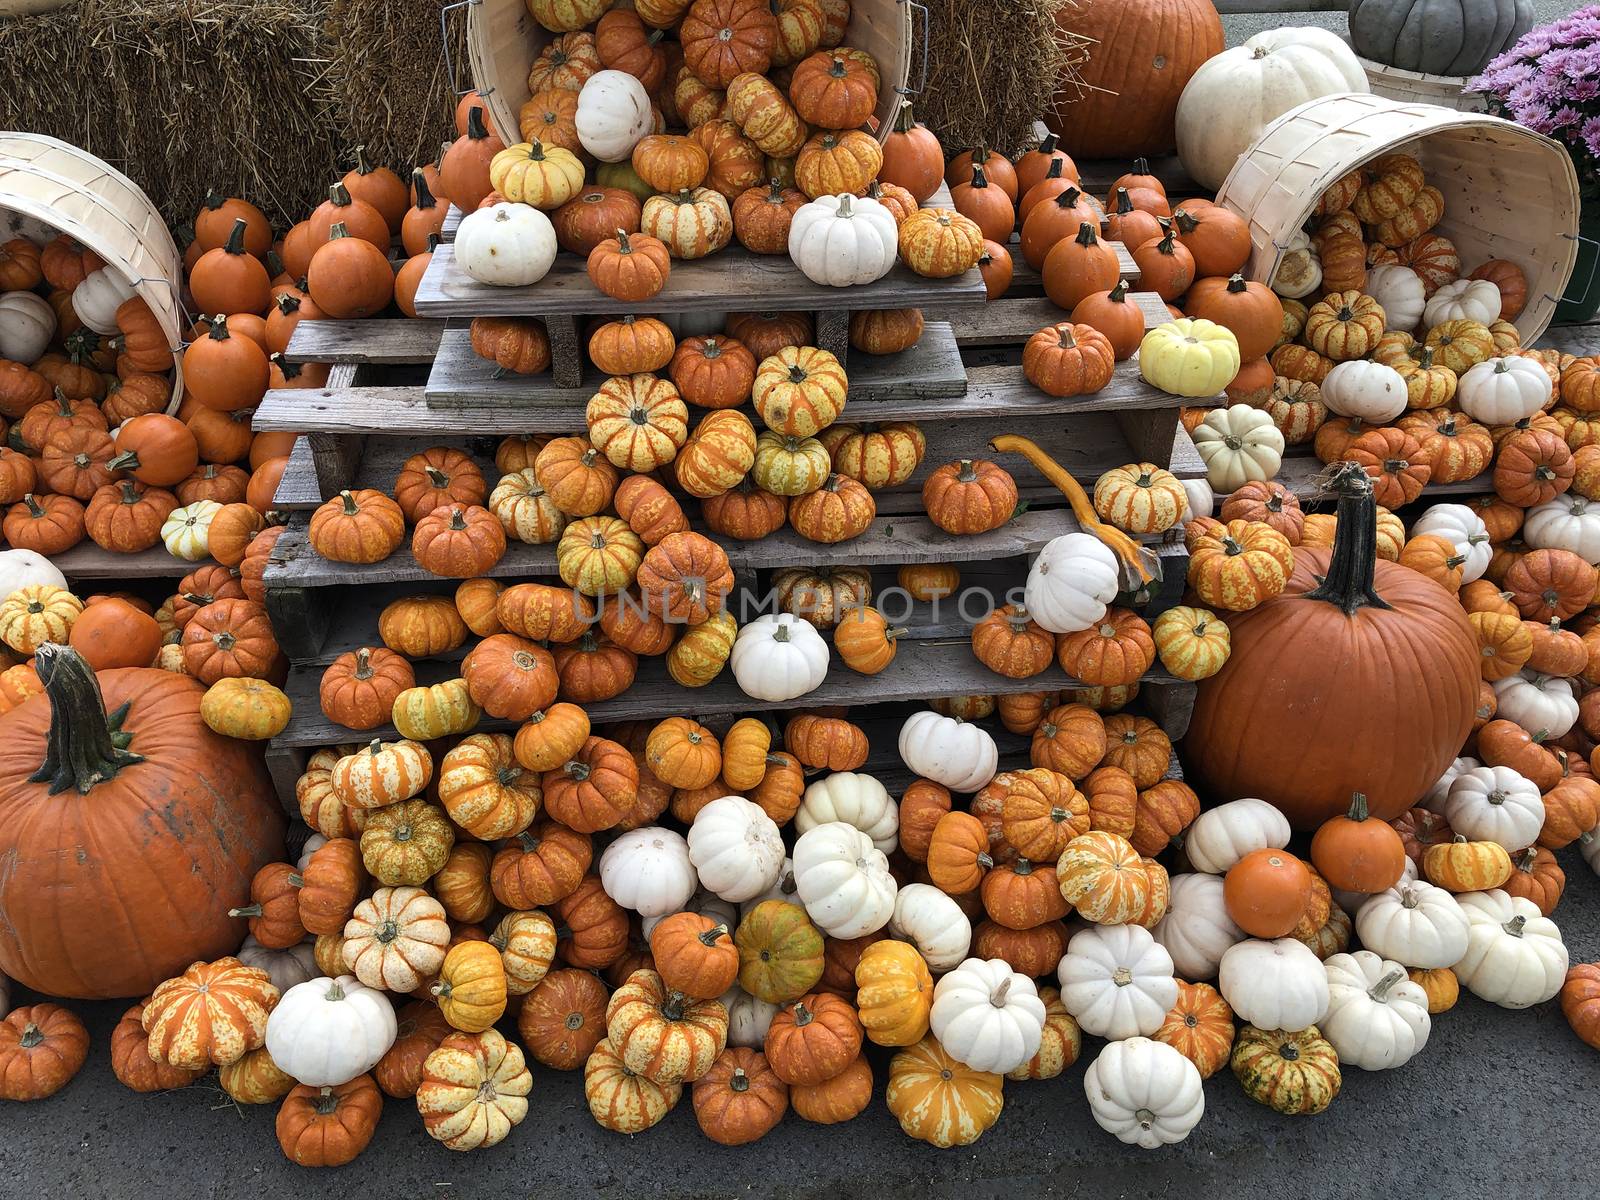 Small and large pumpkins of different colors by ben44